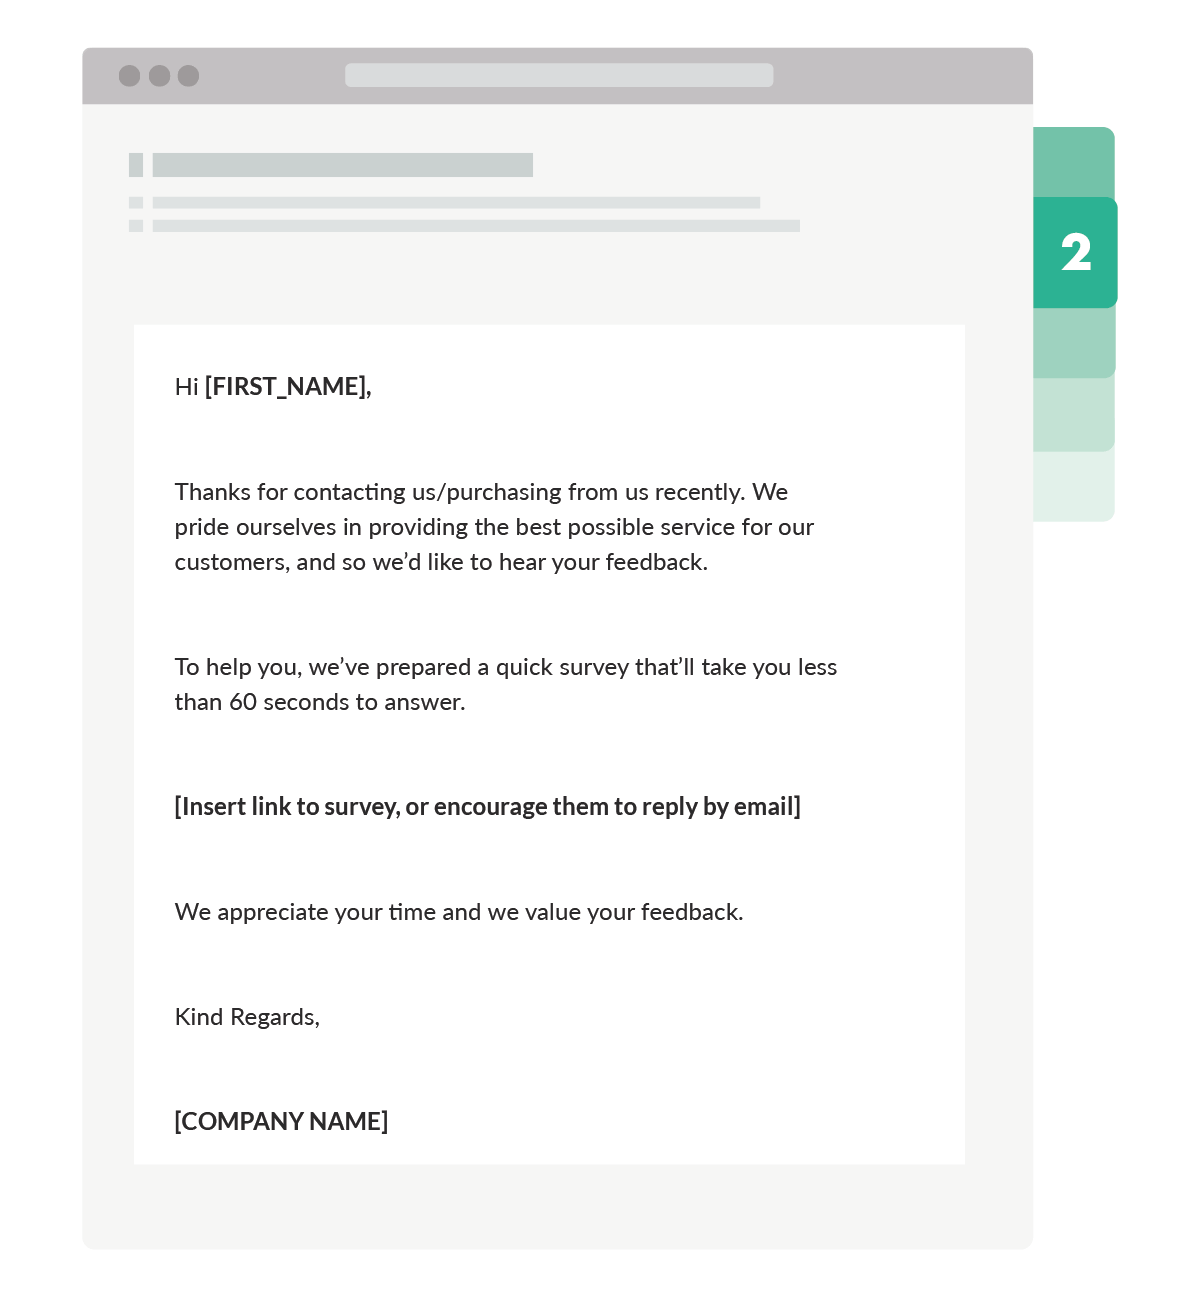 The 'Survey' follow-up email